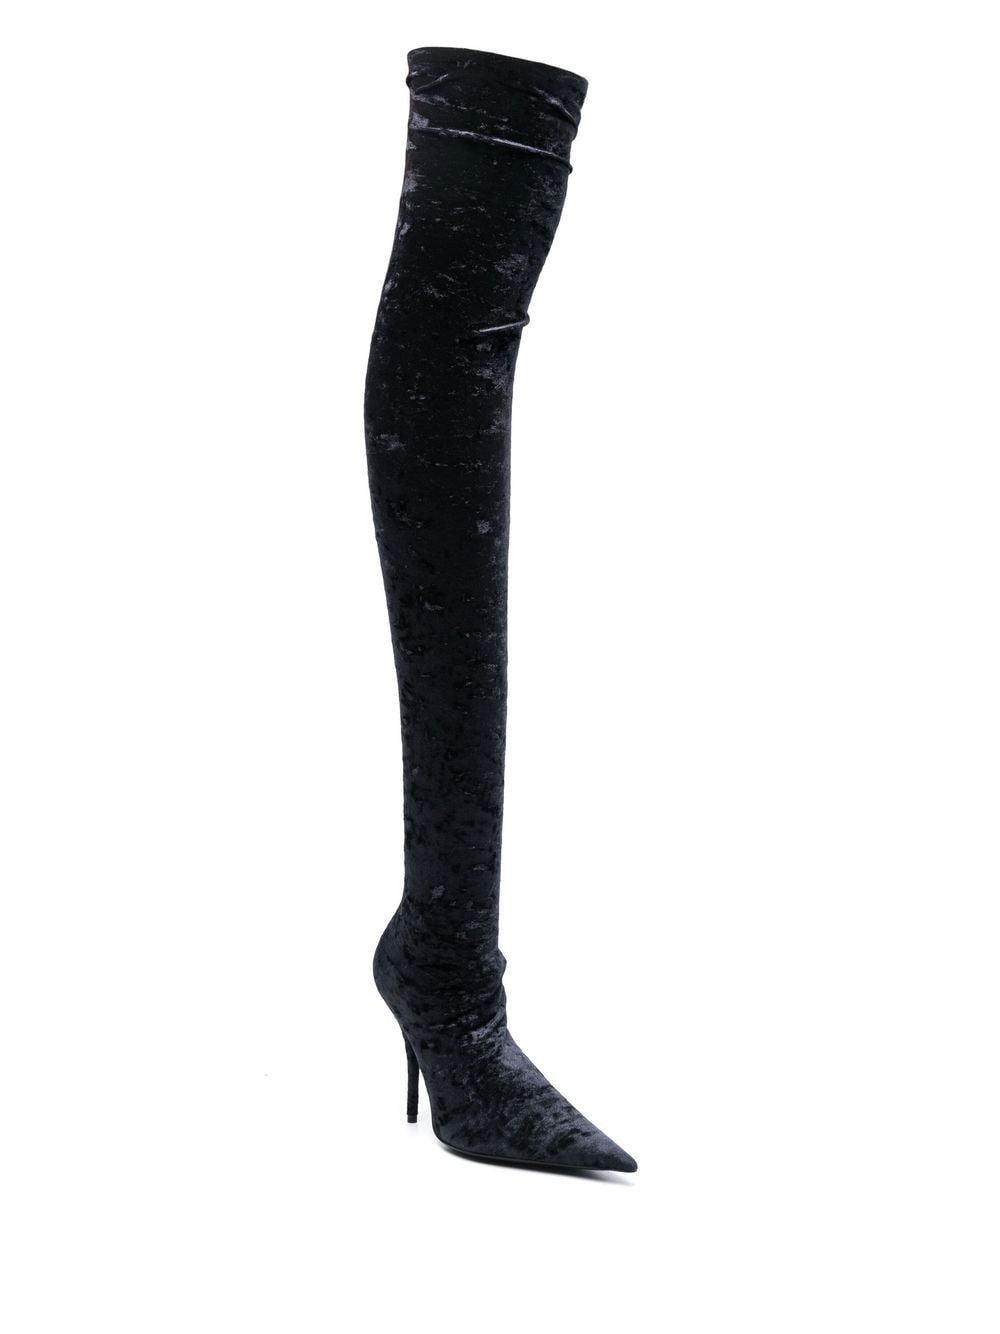 Knife thigh-high crushed velvet boots - 2